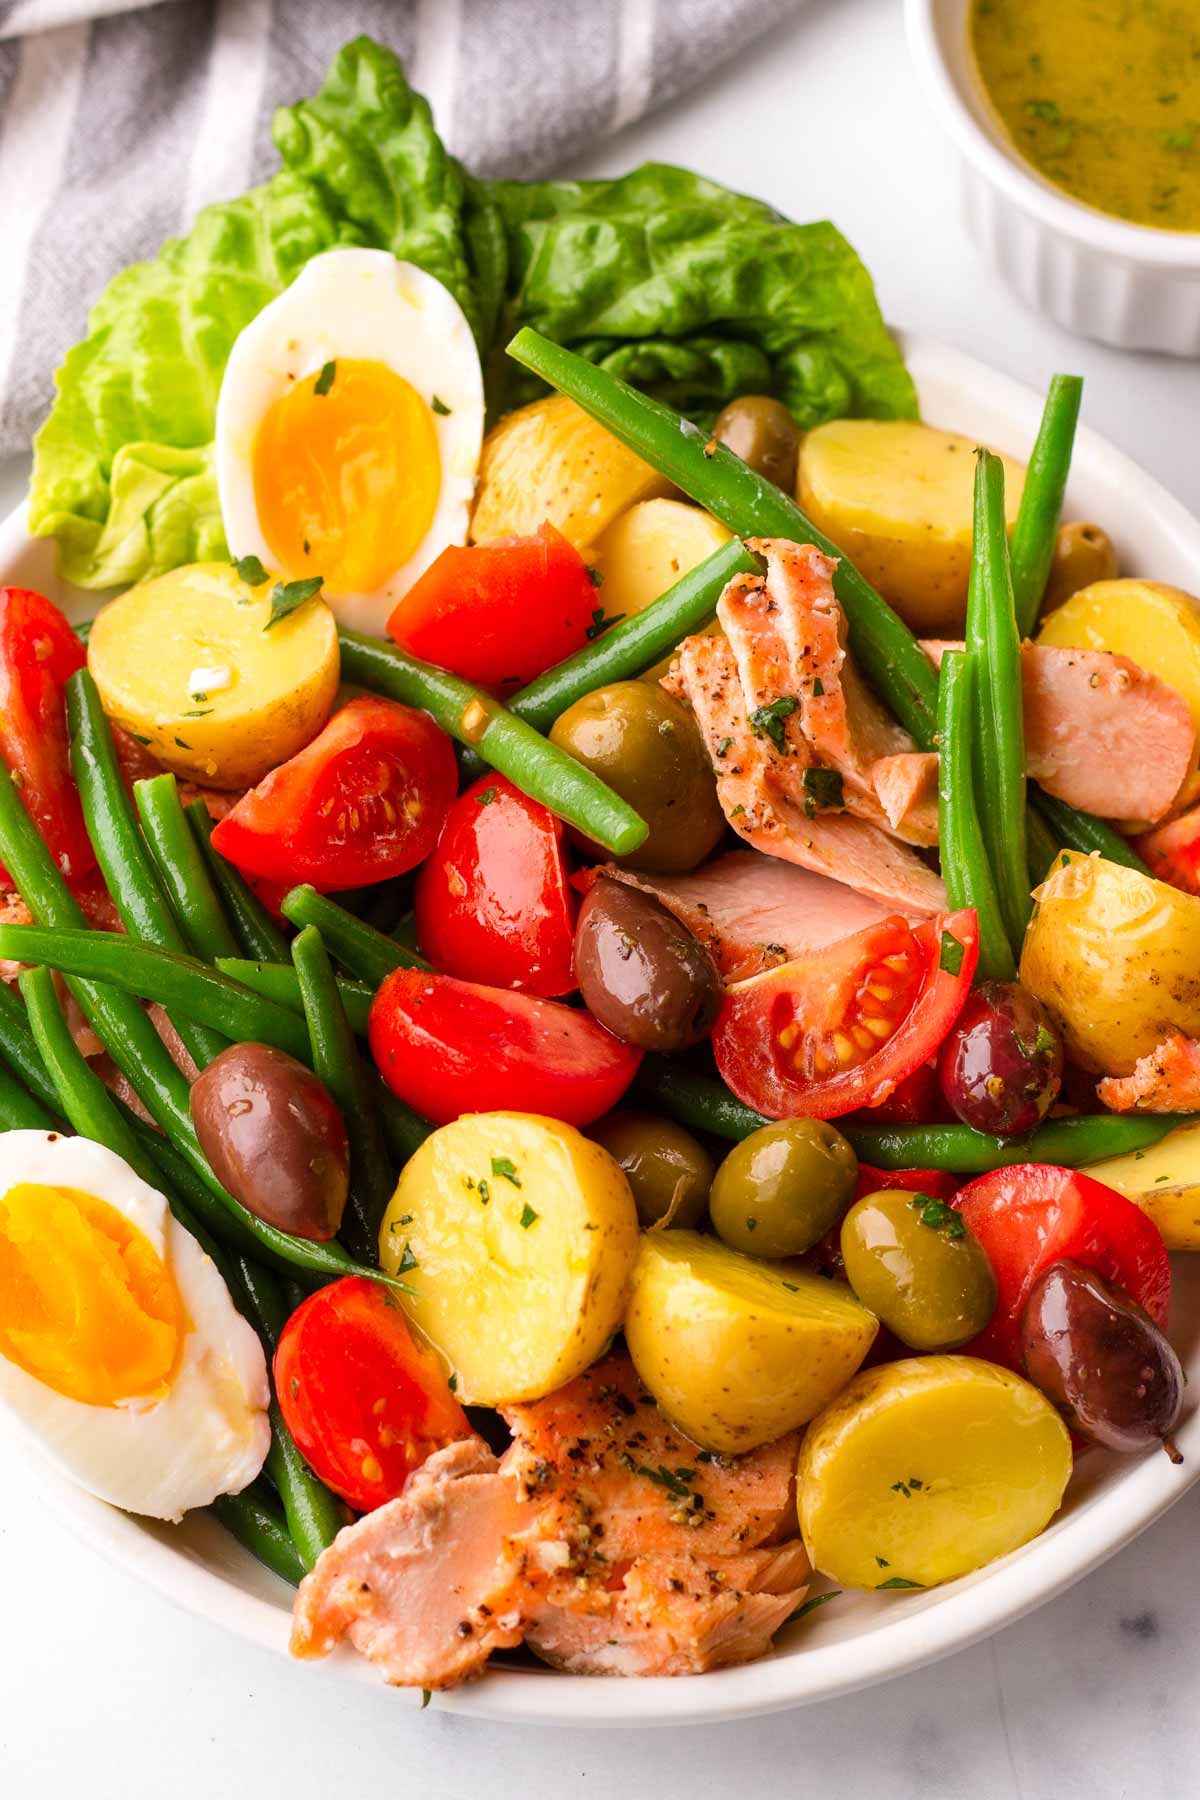 tossed salmon nicoise salad in plate